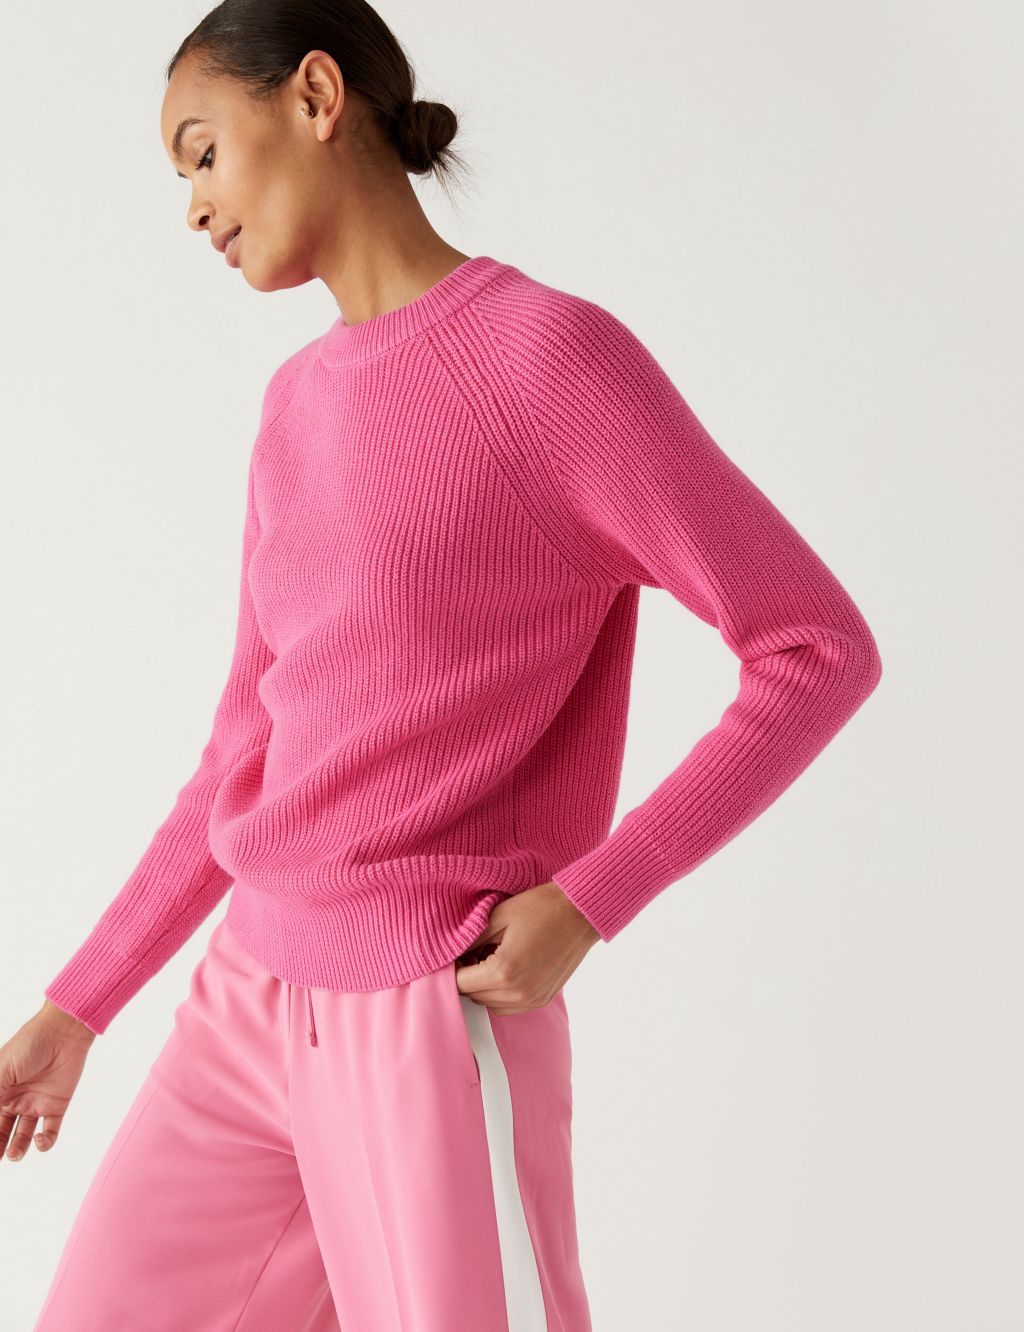 Cotton Rich Ribbed Crew Neck Jumper image 1